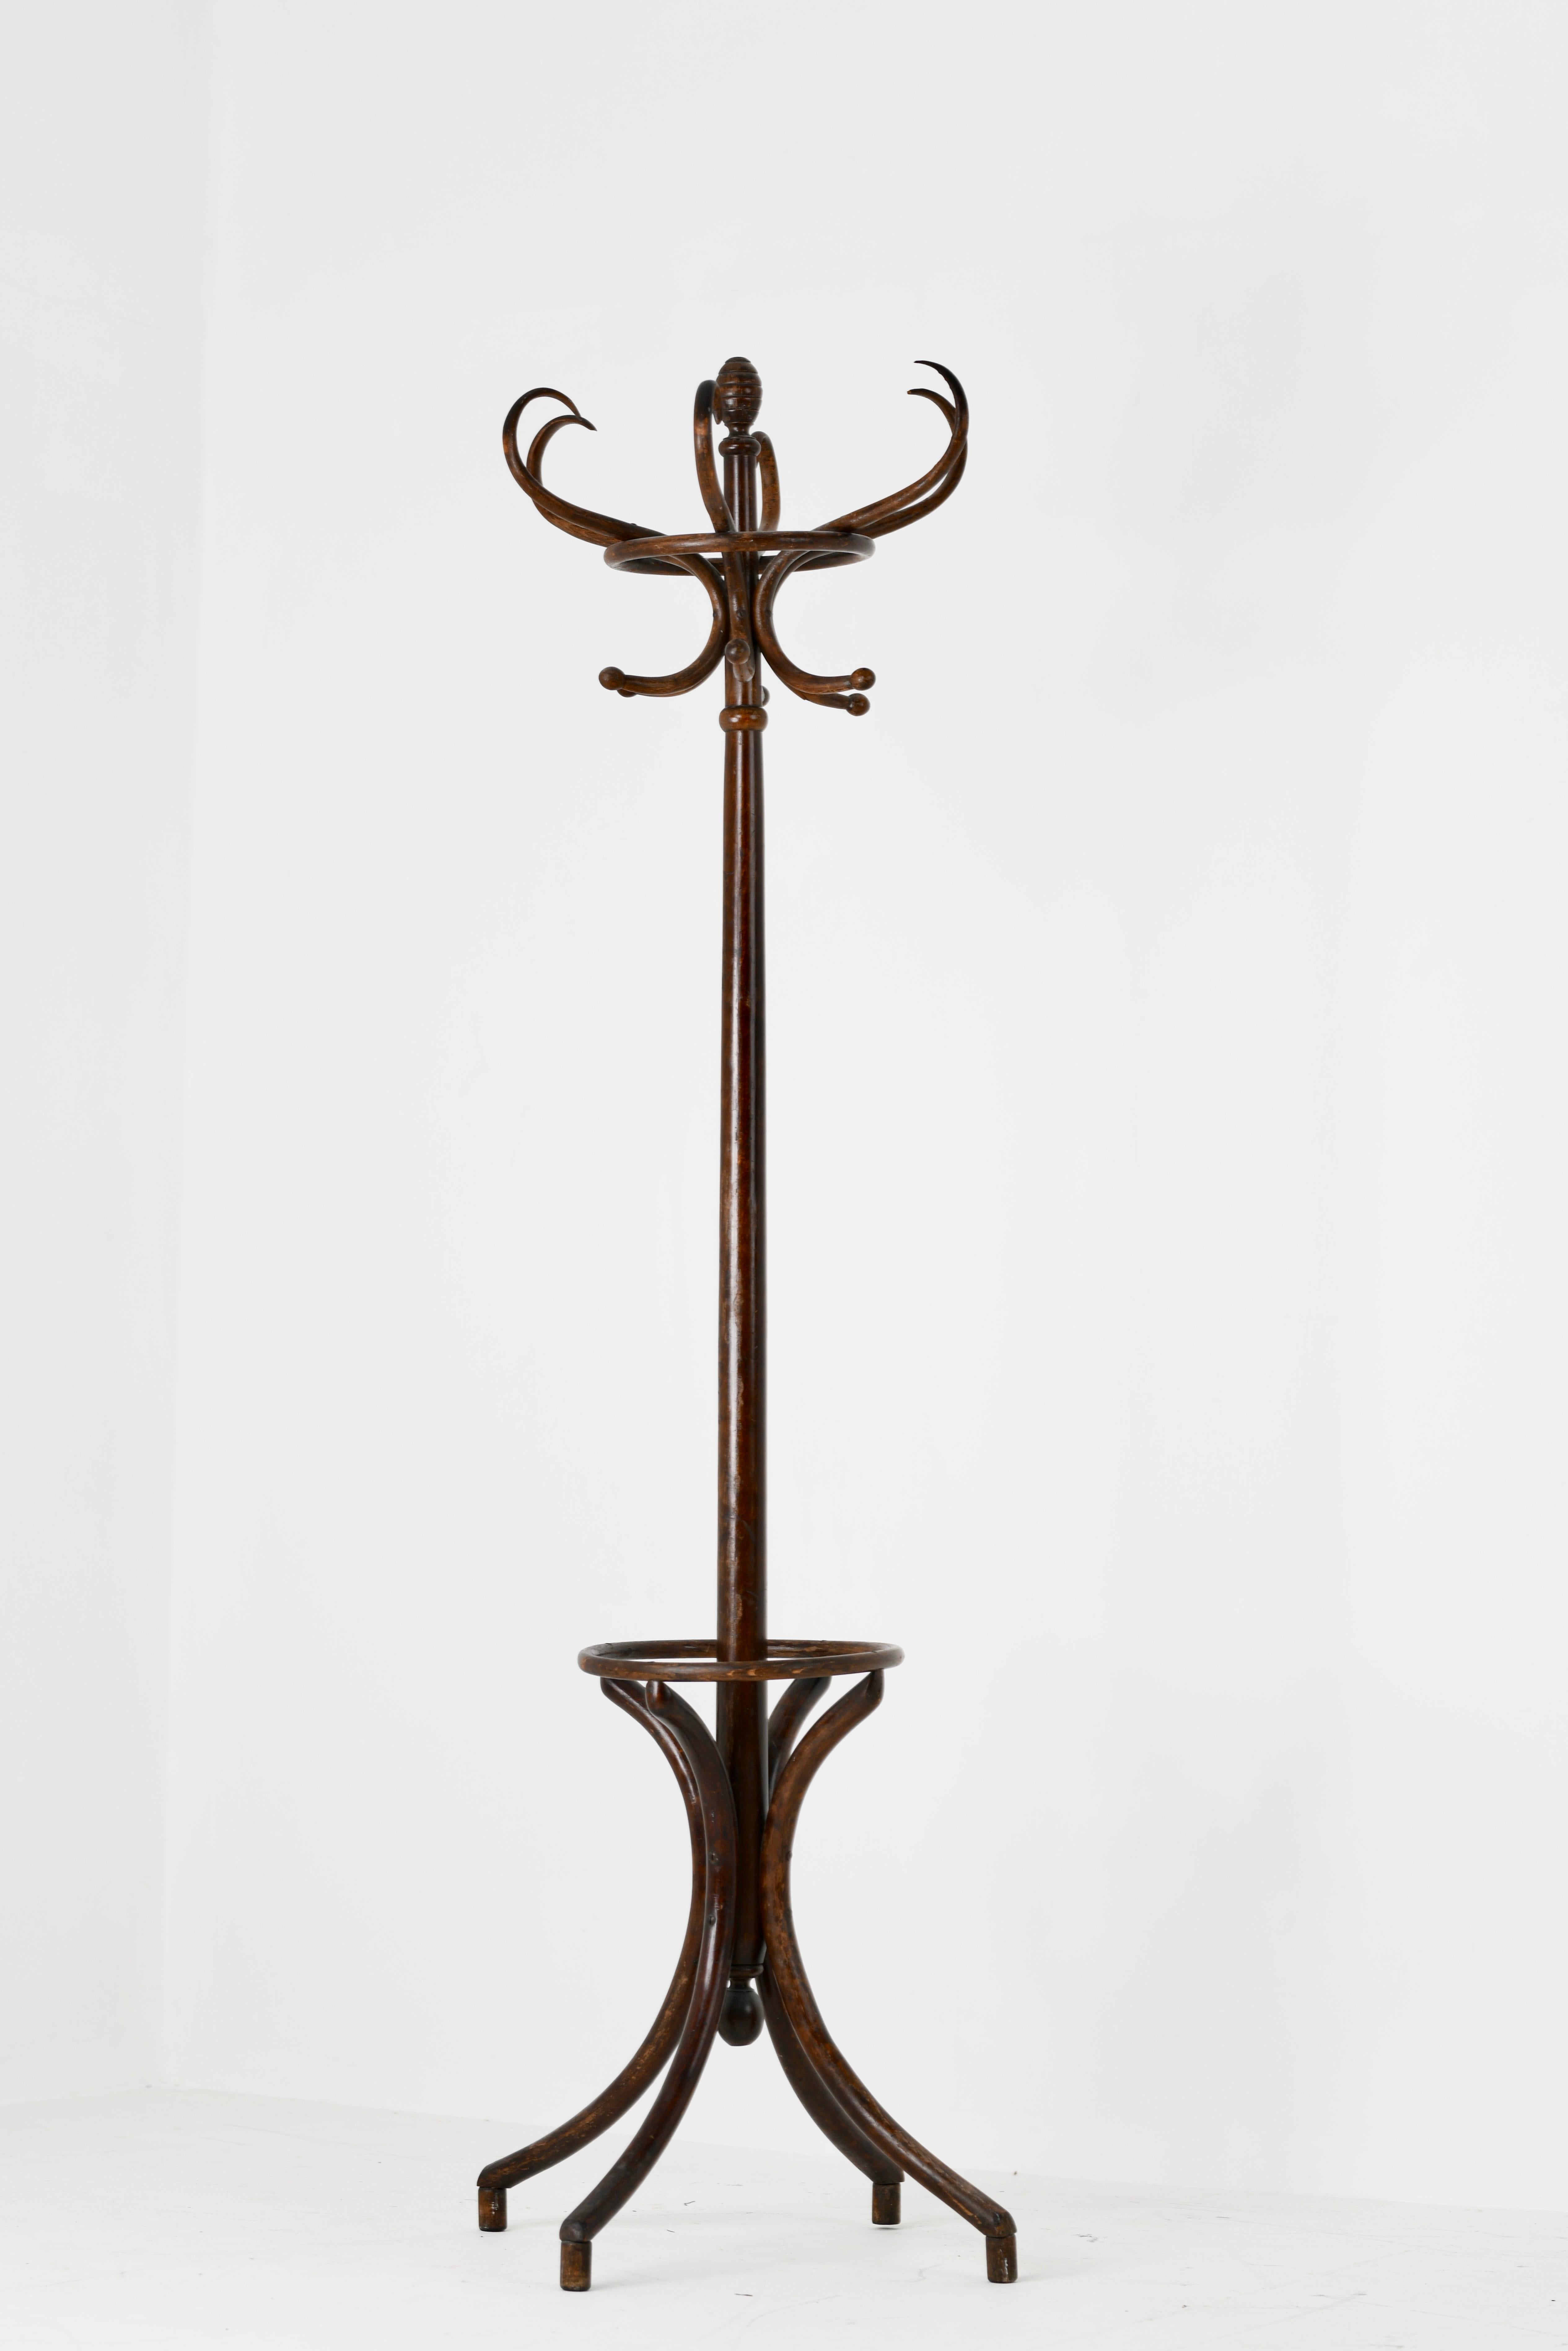 Bentwood hat and coat stand dating from the 1940s good patiantion and attribute to Thonet.
  